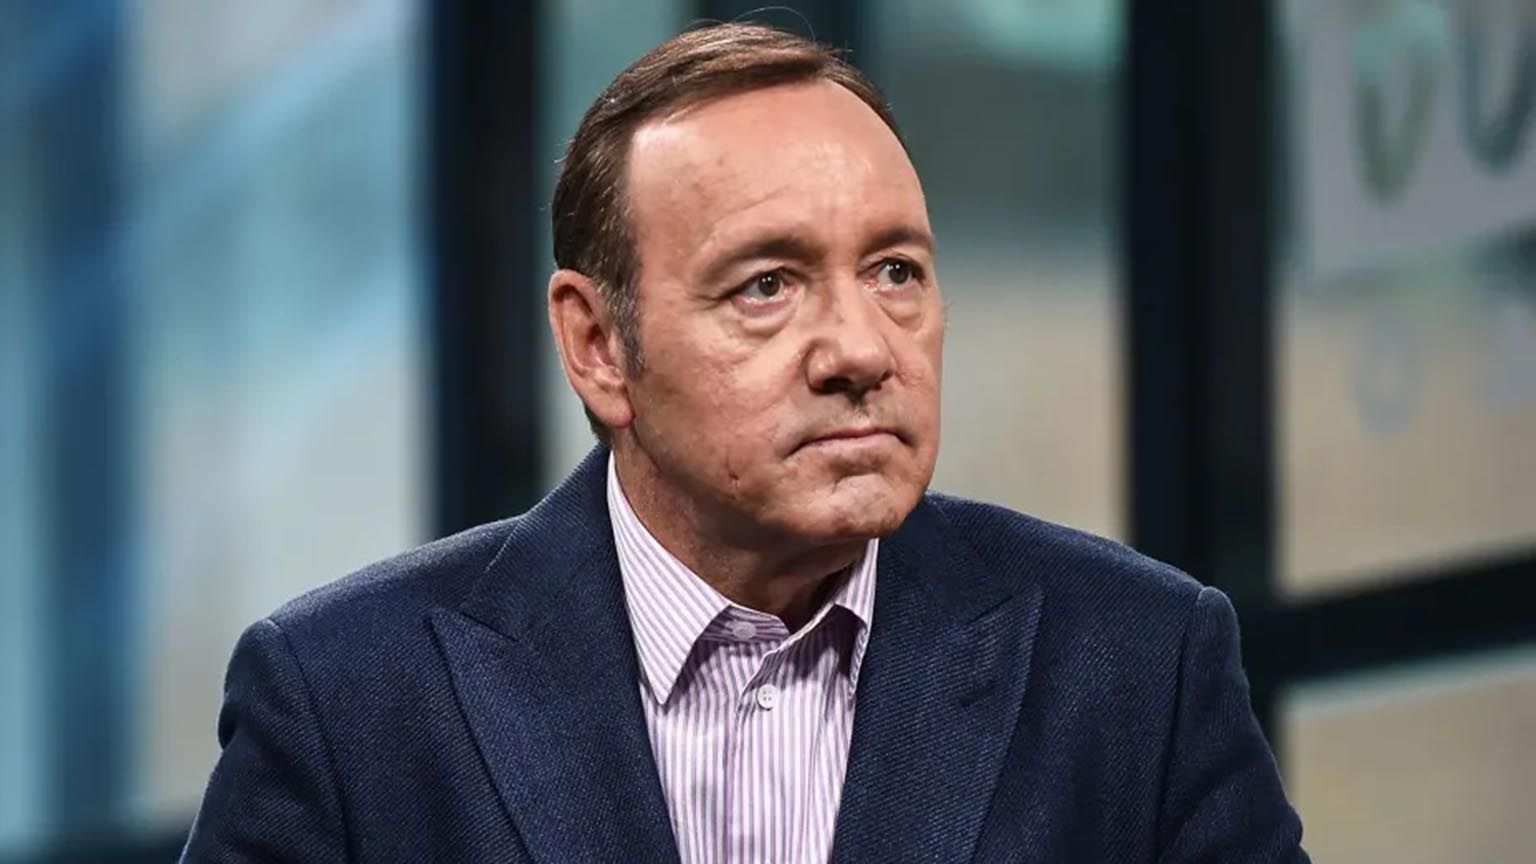 Kevin Spacey charged with sexual assault photo CNBC